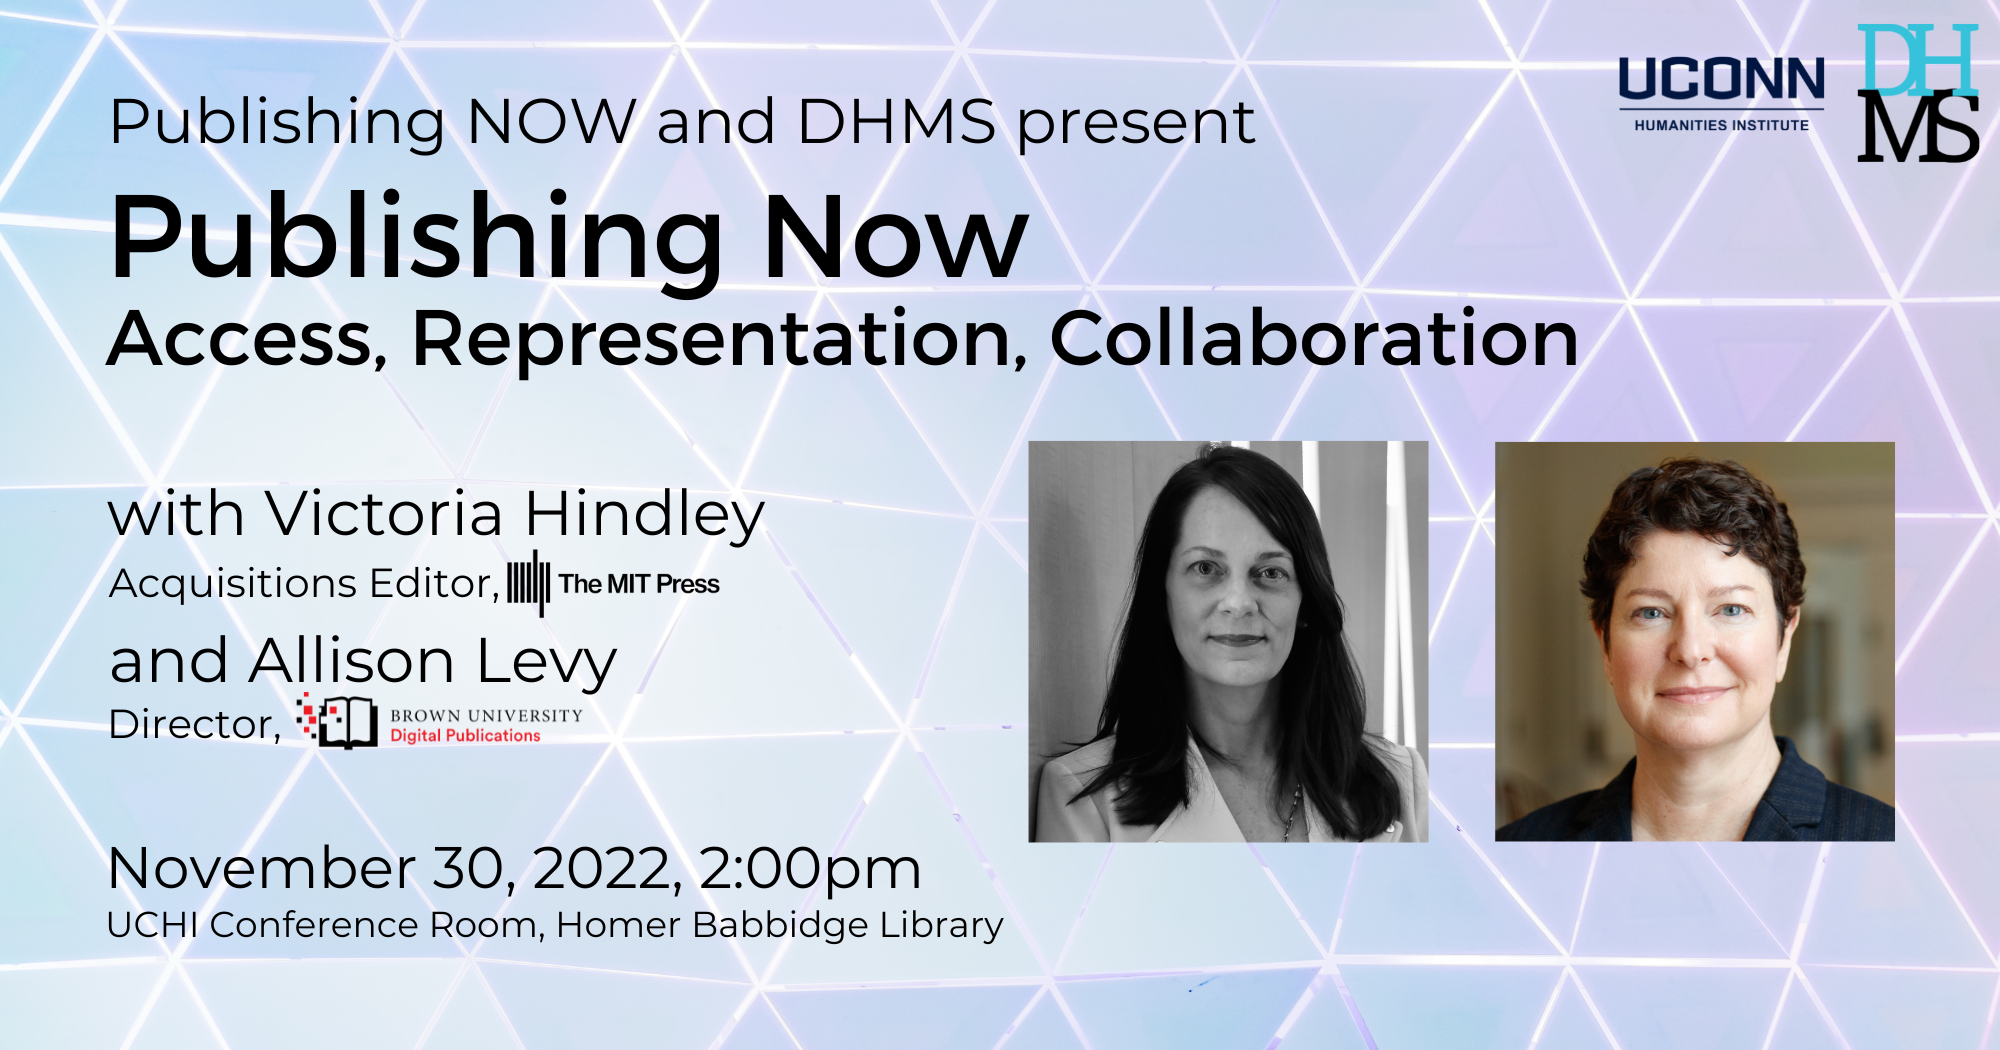 Publishing Now and DHMS present: Publishing Now: Access, Representation, Collaboration Victoria Hindley (MIT Press) and Allison Levy (Brown University Digital Publication) November 30, 2022, 2:00pm Homer Babbidge Library, Humanities Institute Conference Room